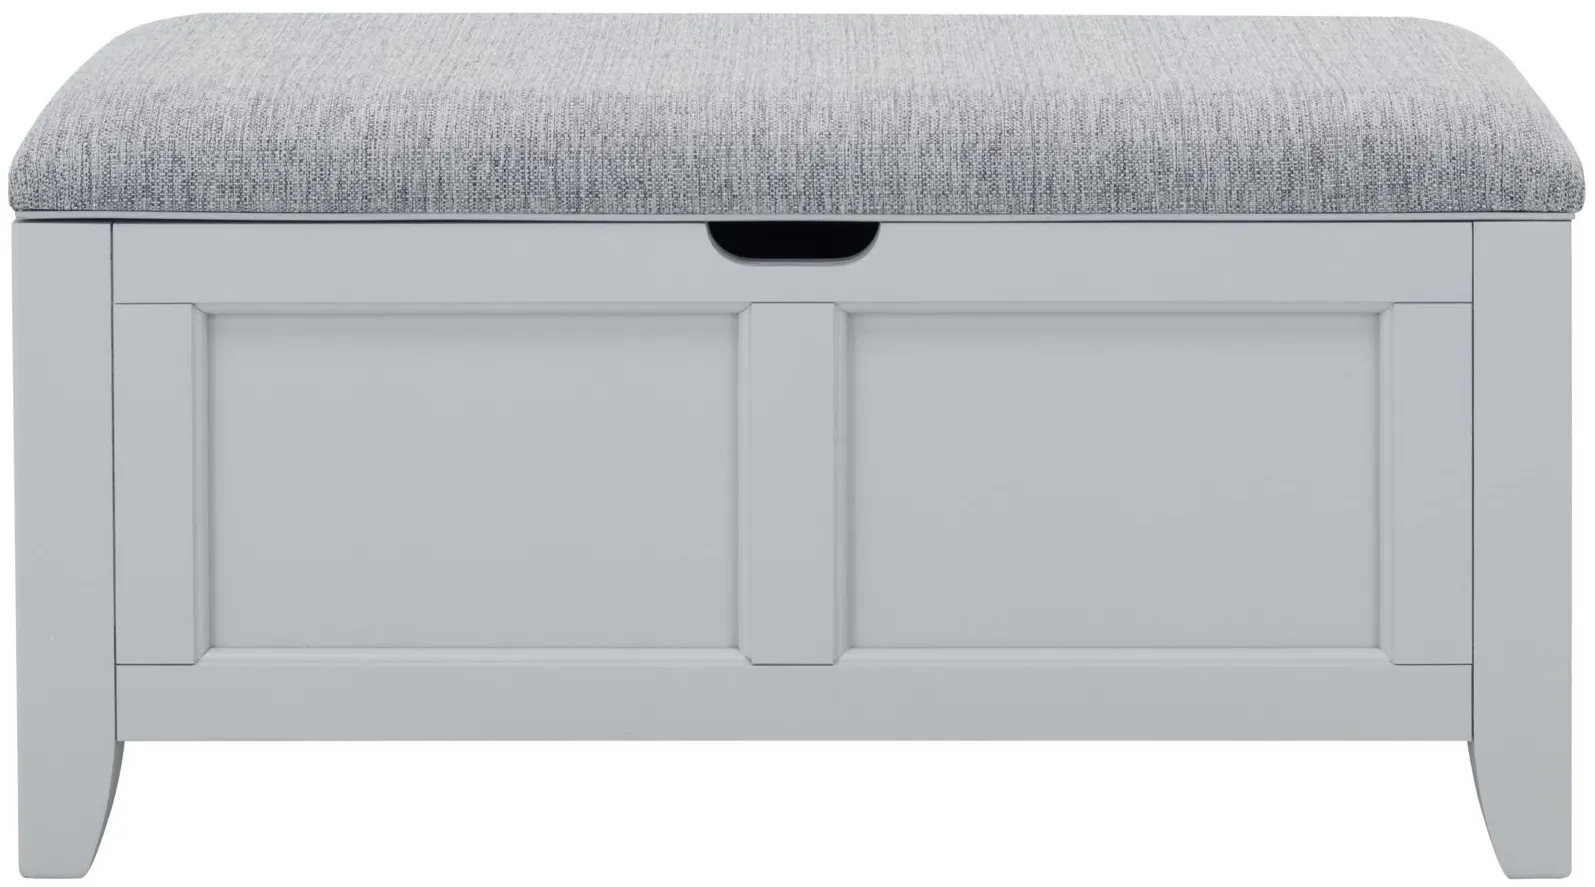 Kylie Youth Lift-Top Storage Bench in Gray by Bellanest